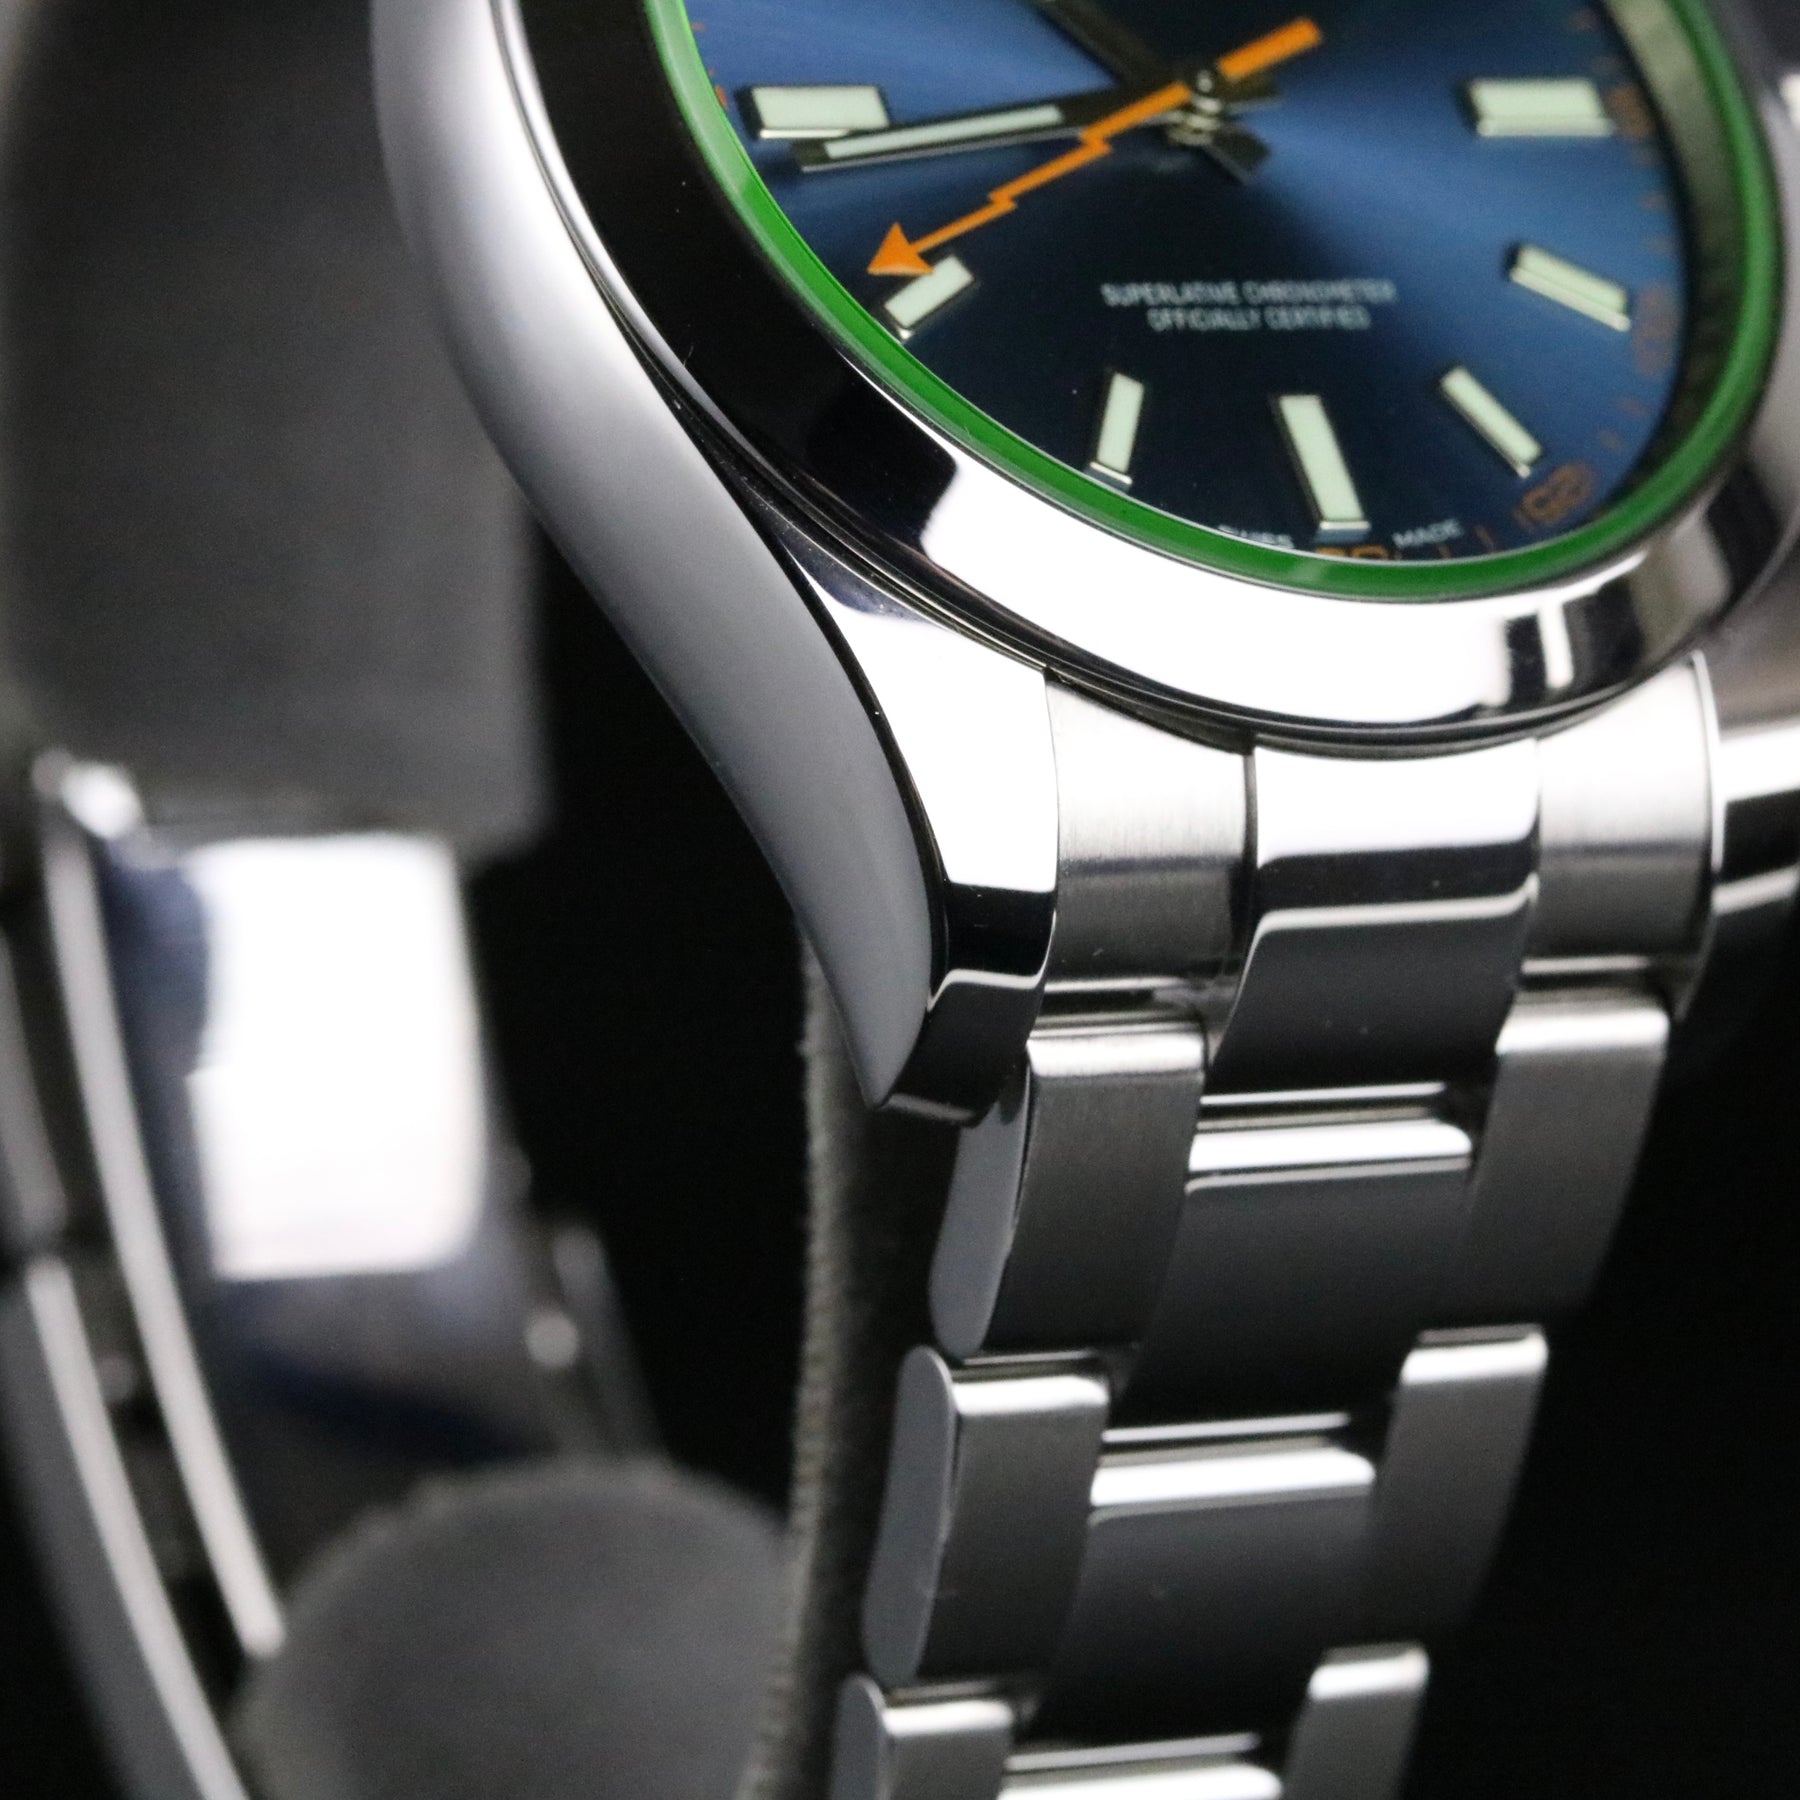 2022 Rolex 116400GV MILGAUSS GREEN SAPPHIRE BLUE DIAL with Box & Papers